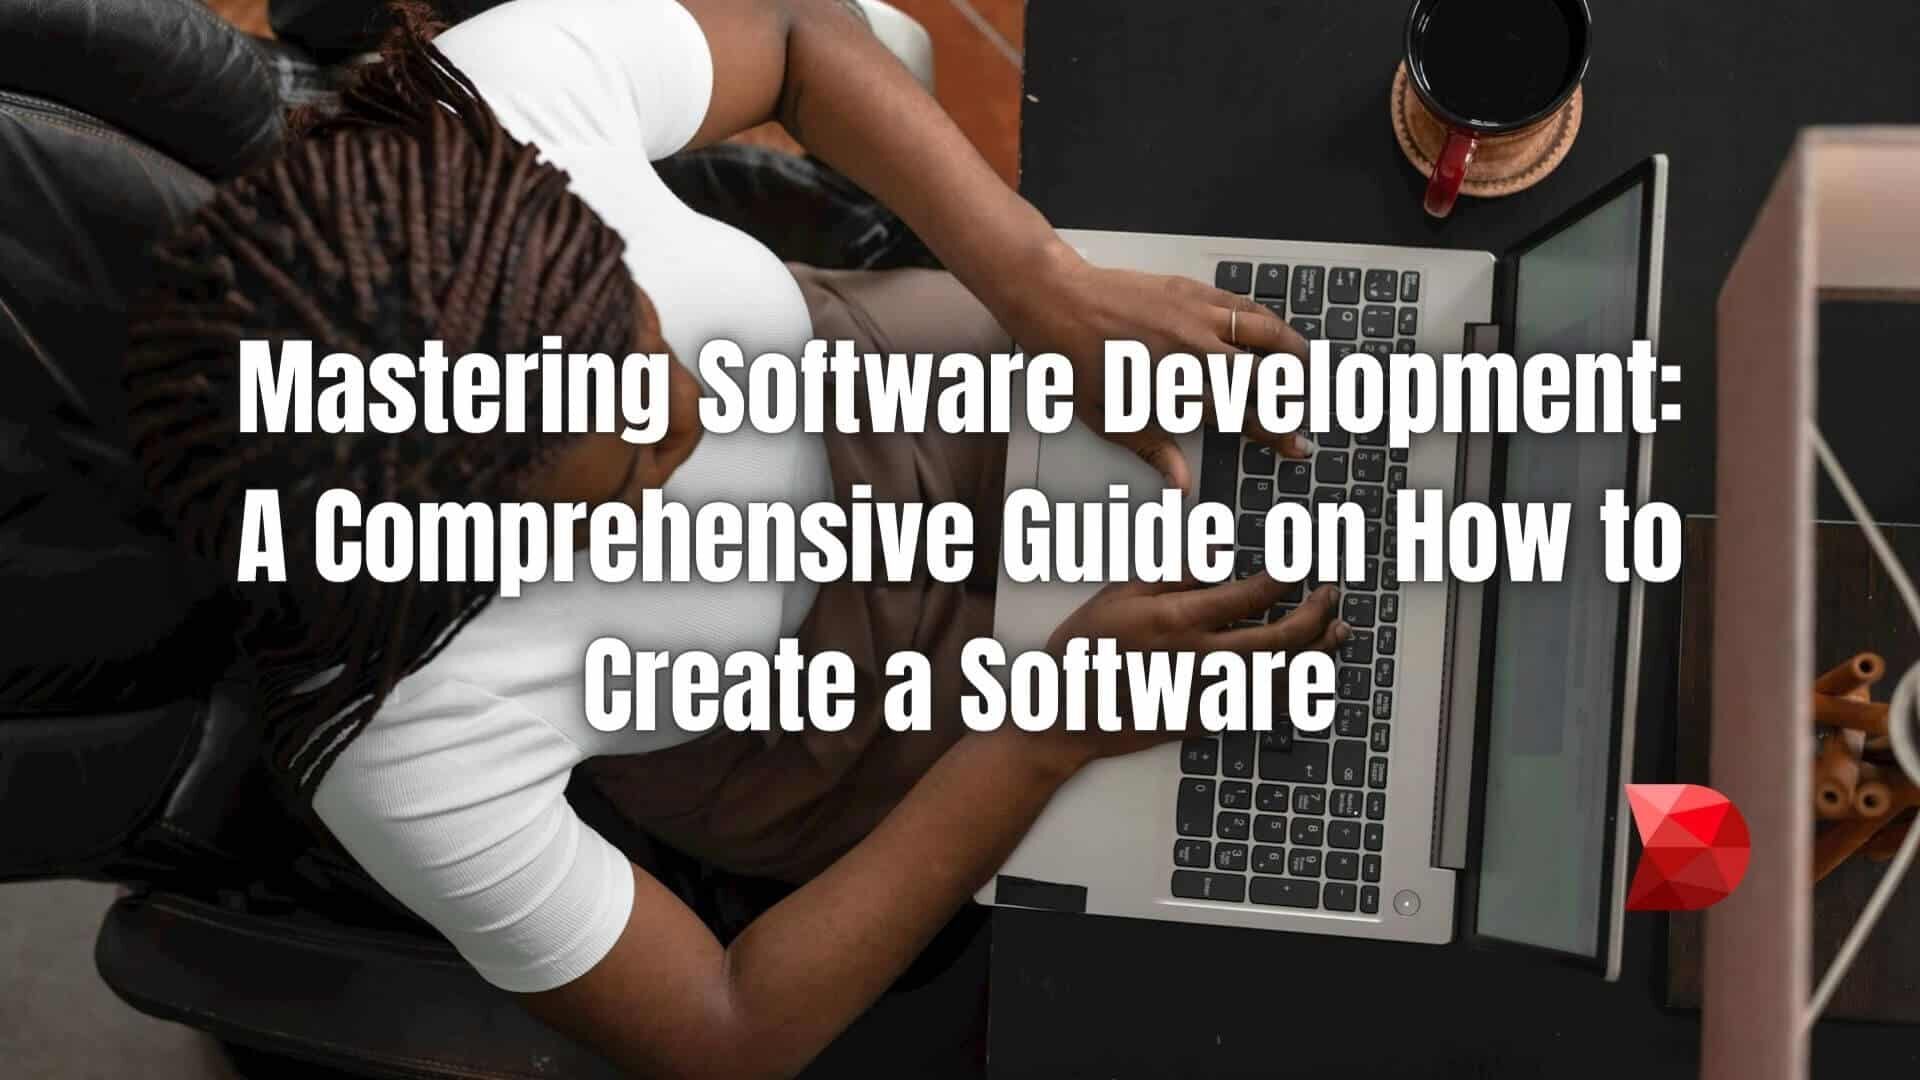 Unlock the secrets of software development with our guide! Learn step-by-step how to create powerful software applications for any project.